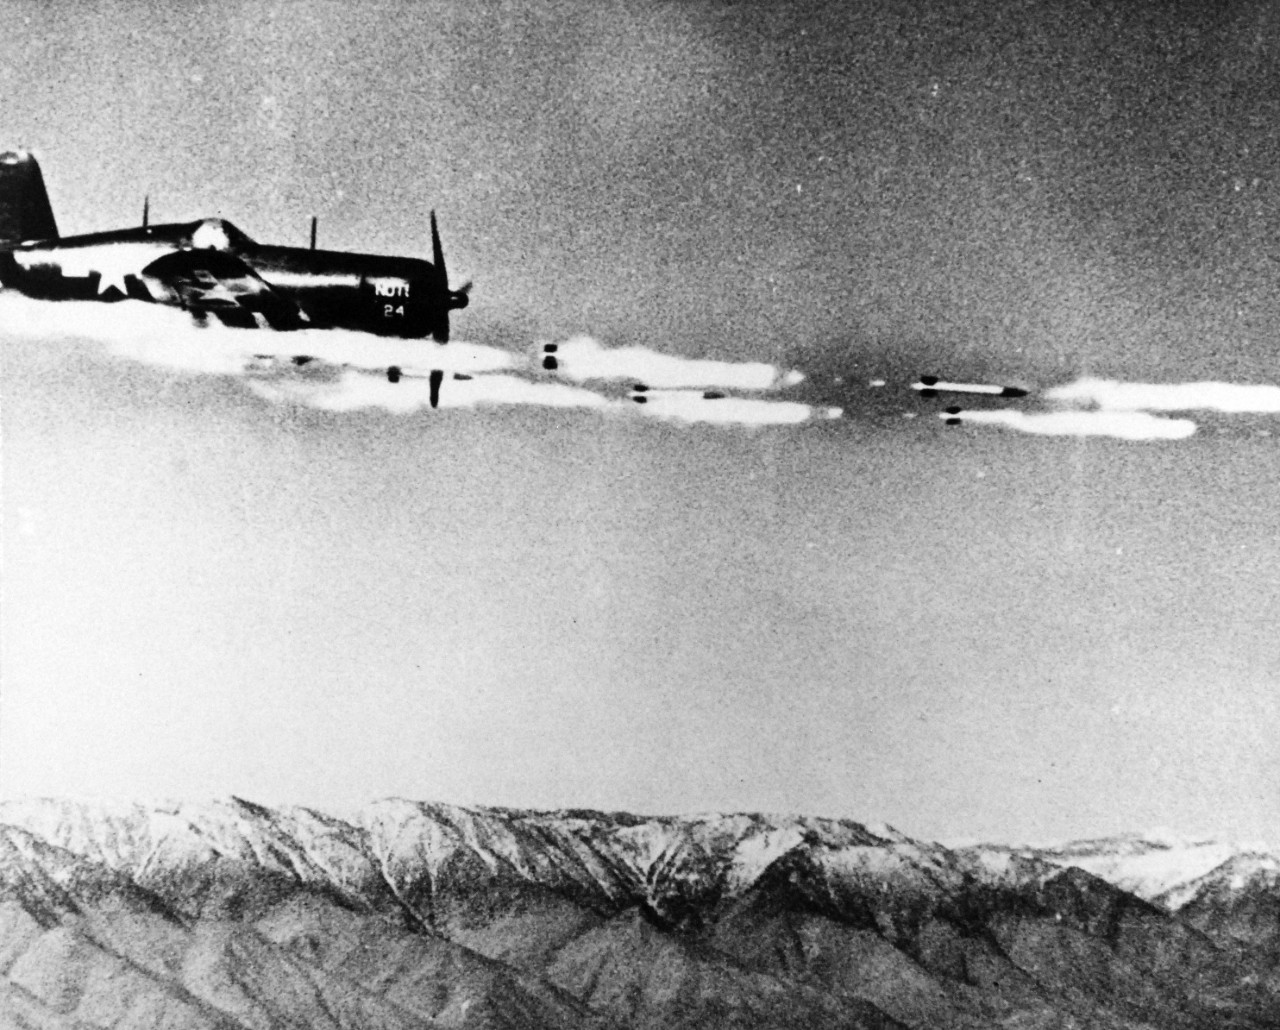 80-G-49320: Vought F4U Corsair, June 1945.   F4U loaded with rockets from Naval Ordnance Test Station, Inyokern, California, June 5, 1945.  Shown:  Rockets being fired from aircraft.    Official U.S. Navy Photograph, now in the collections of the National Archives.  